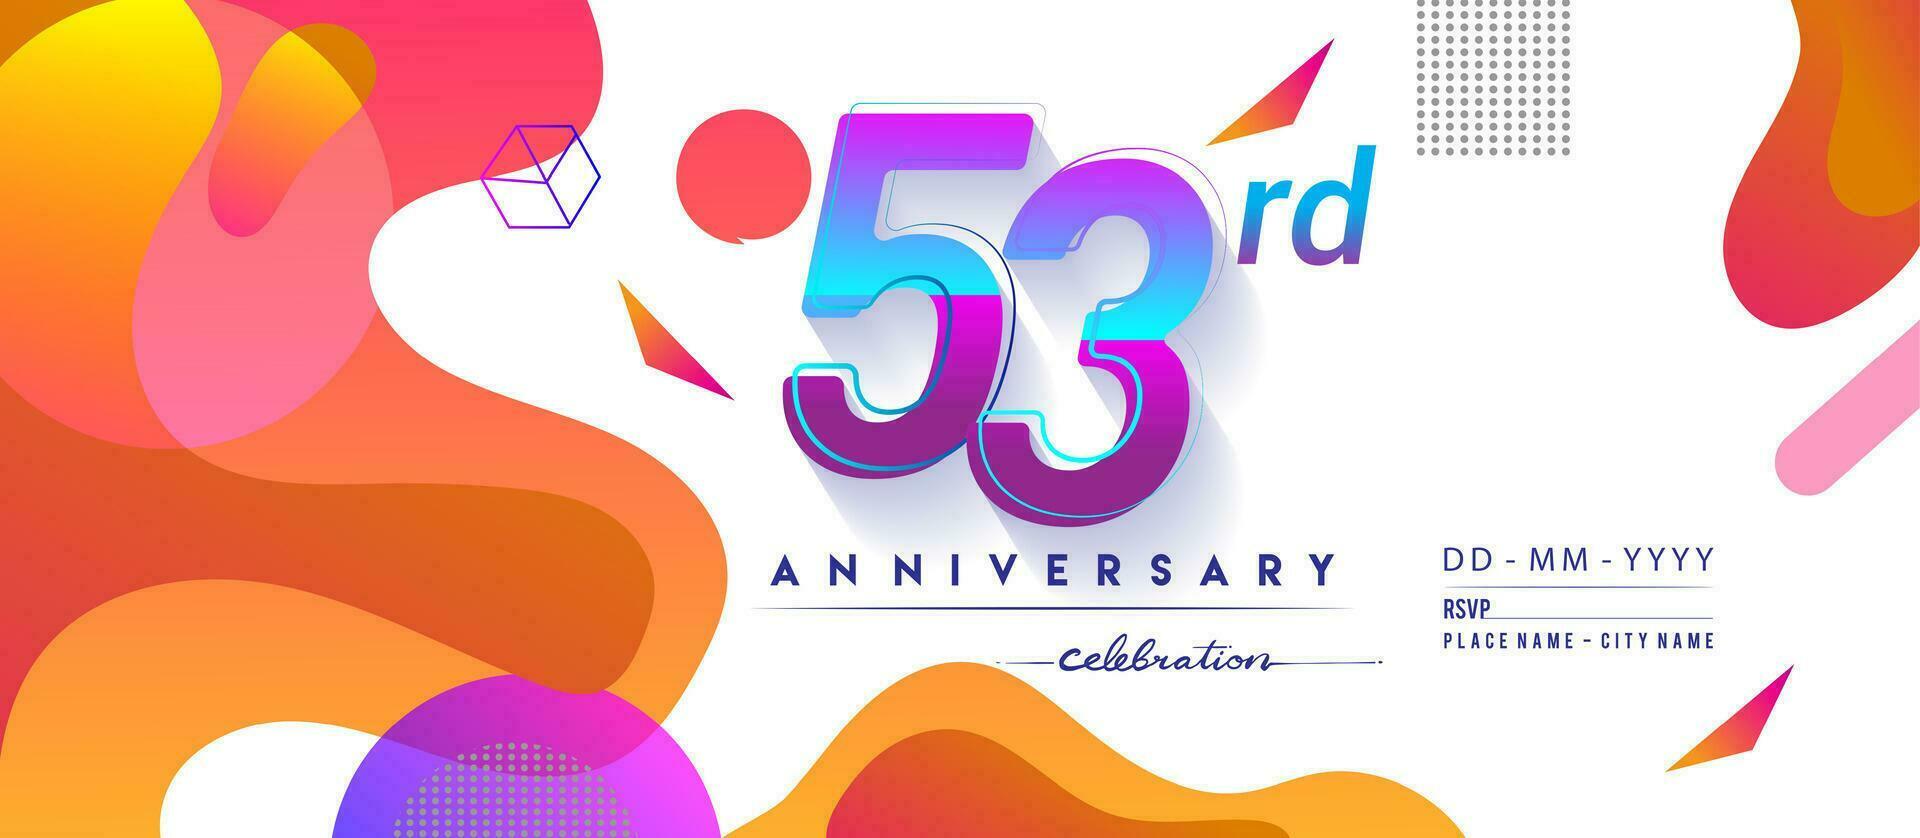 53rd years anniversary logo, vector design birthday celebration with colorful geometric background and circles shape.